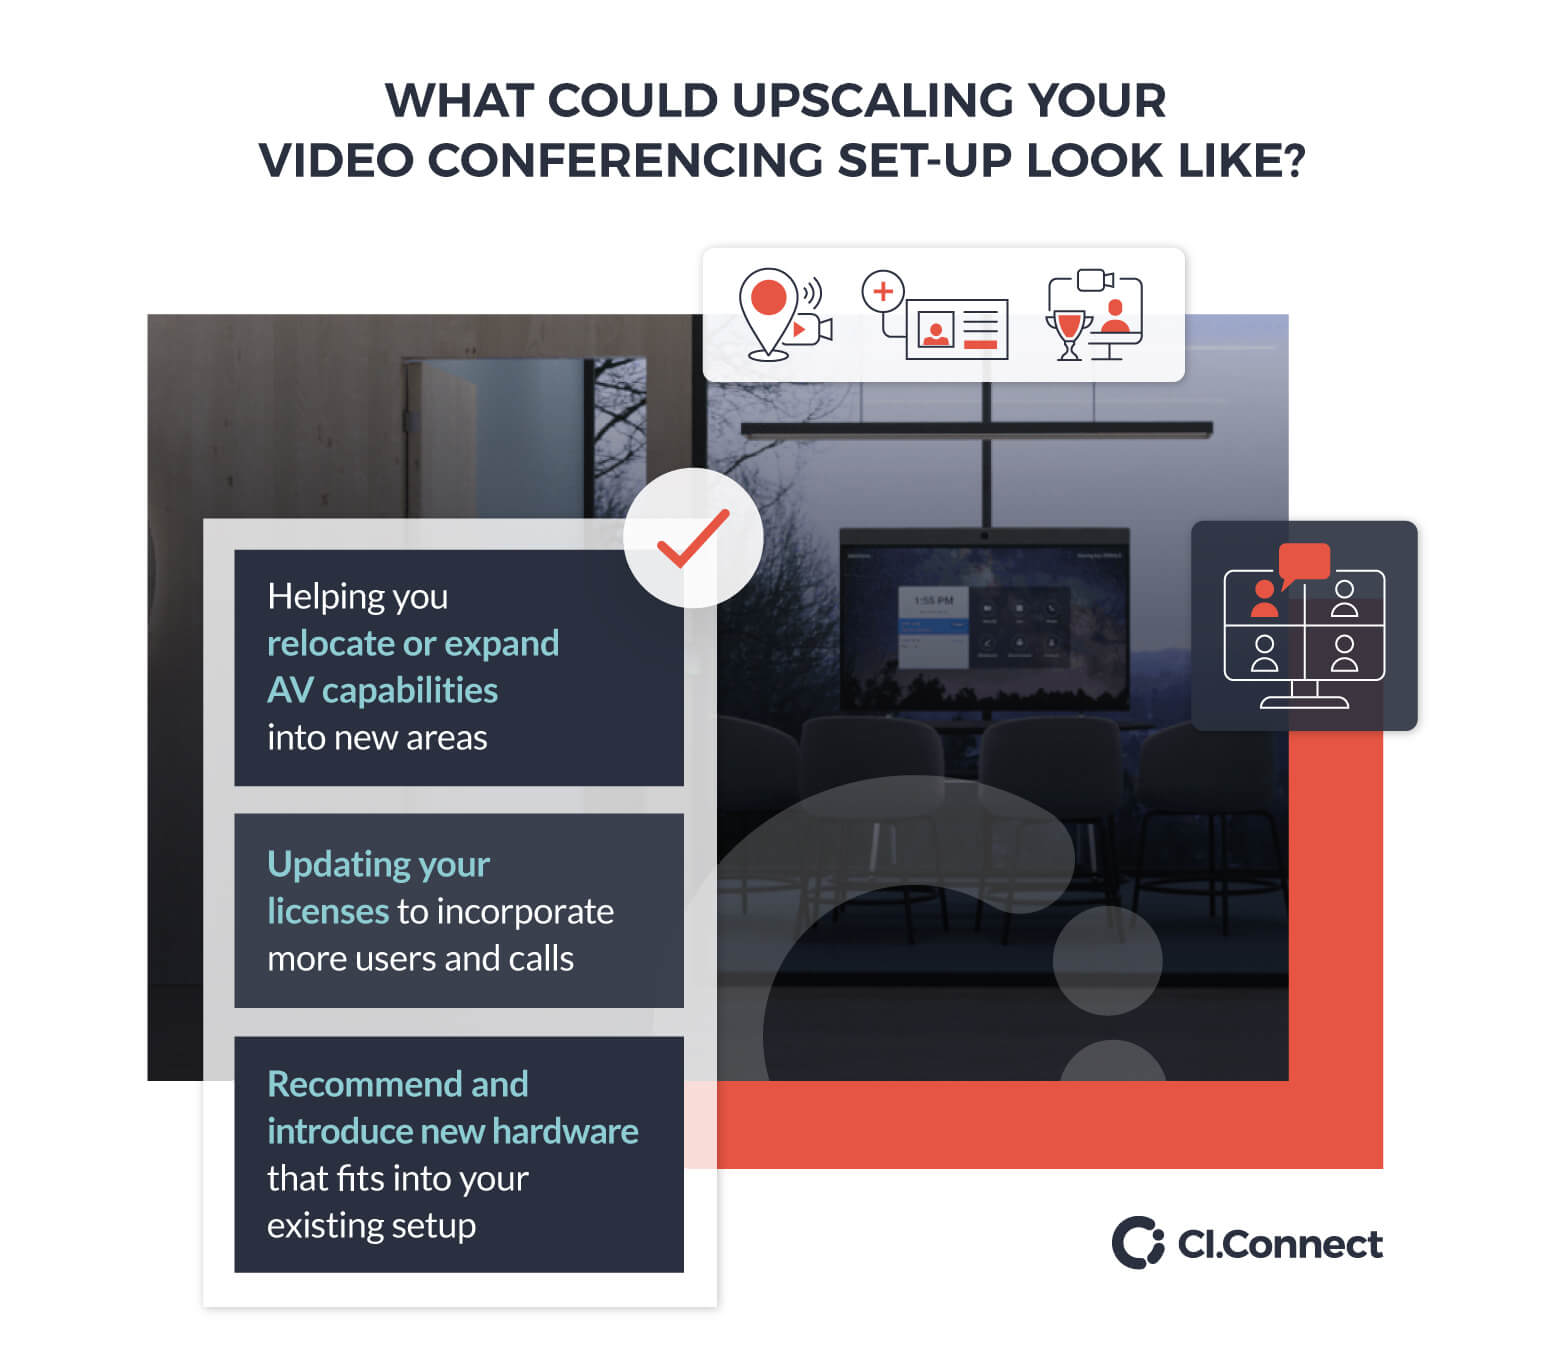 What could upscaling your video conferencing set-up look like?